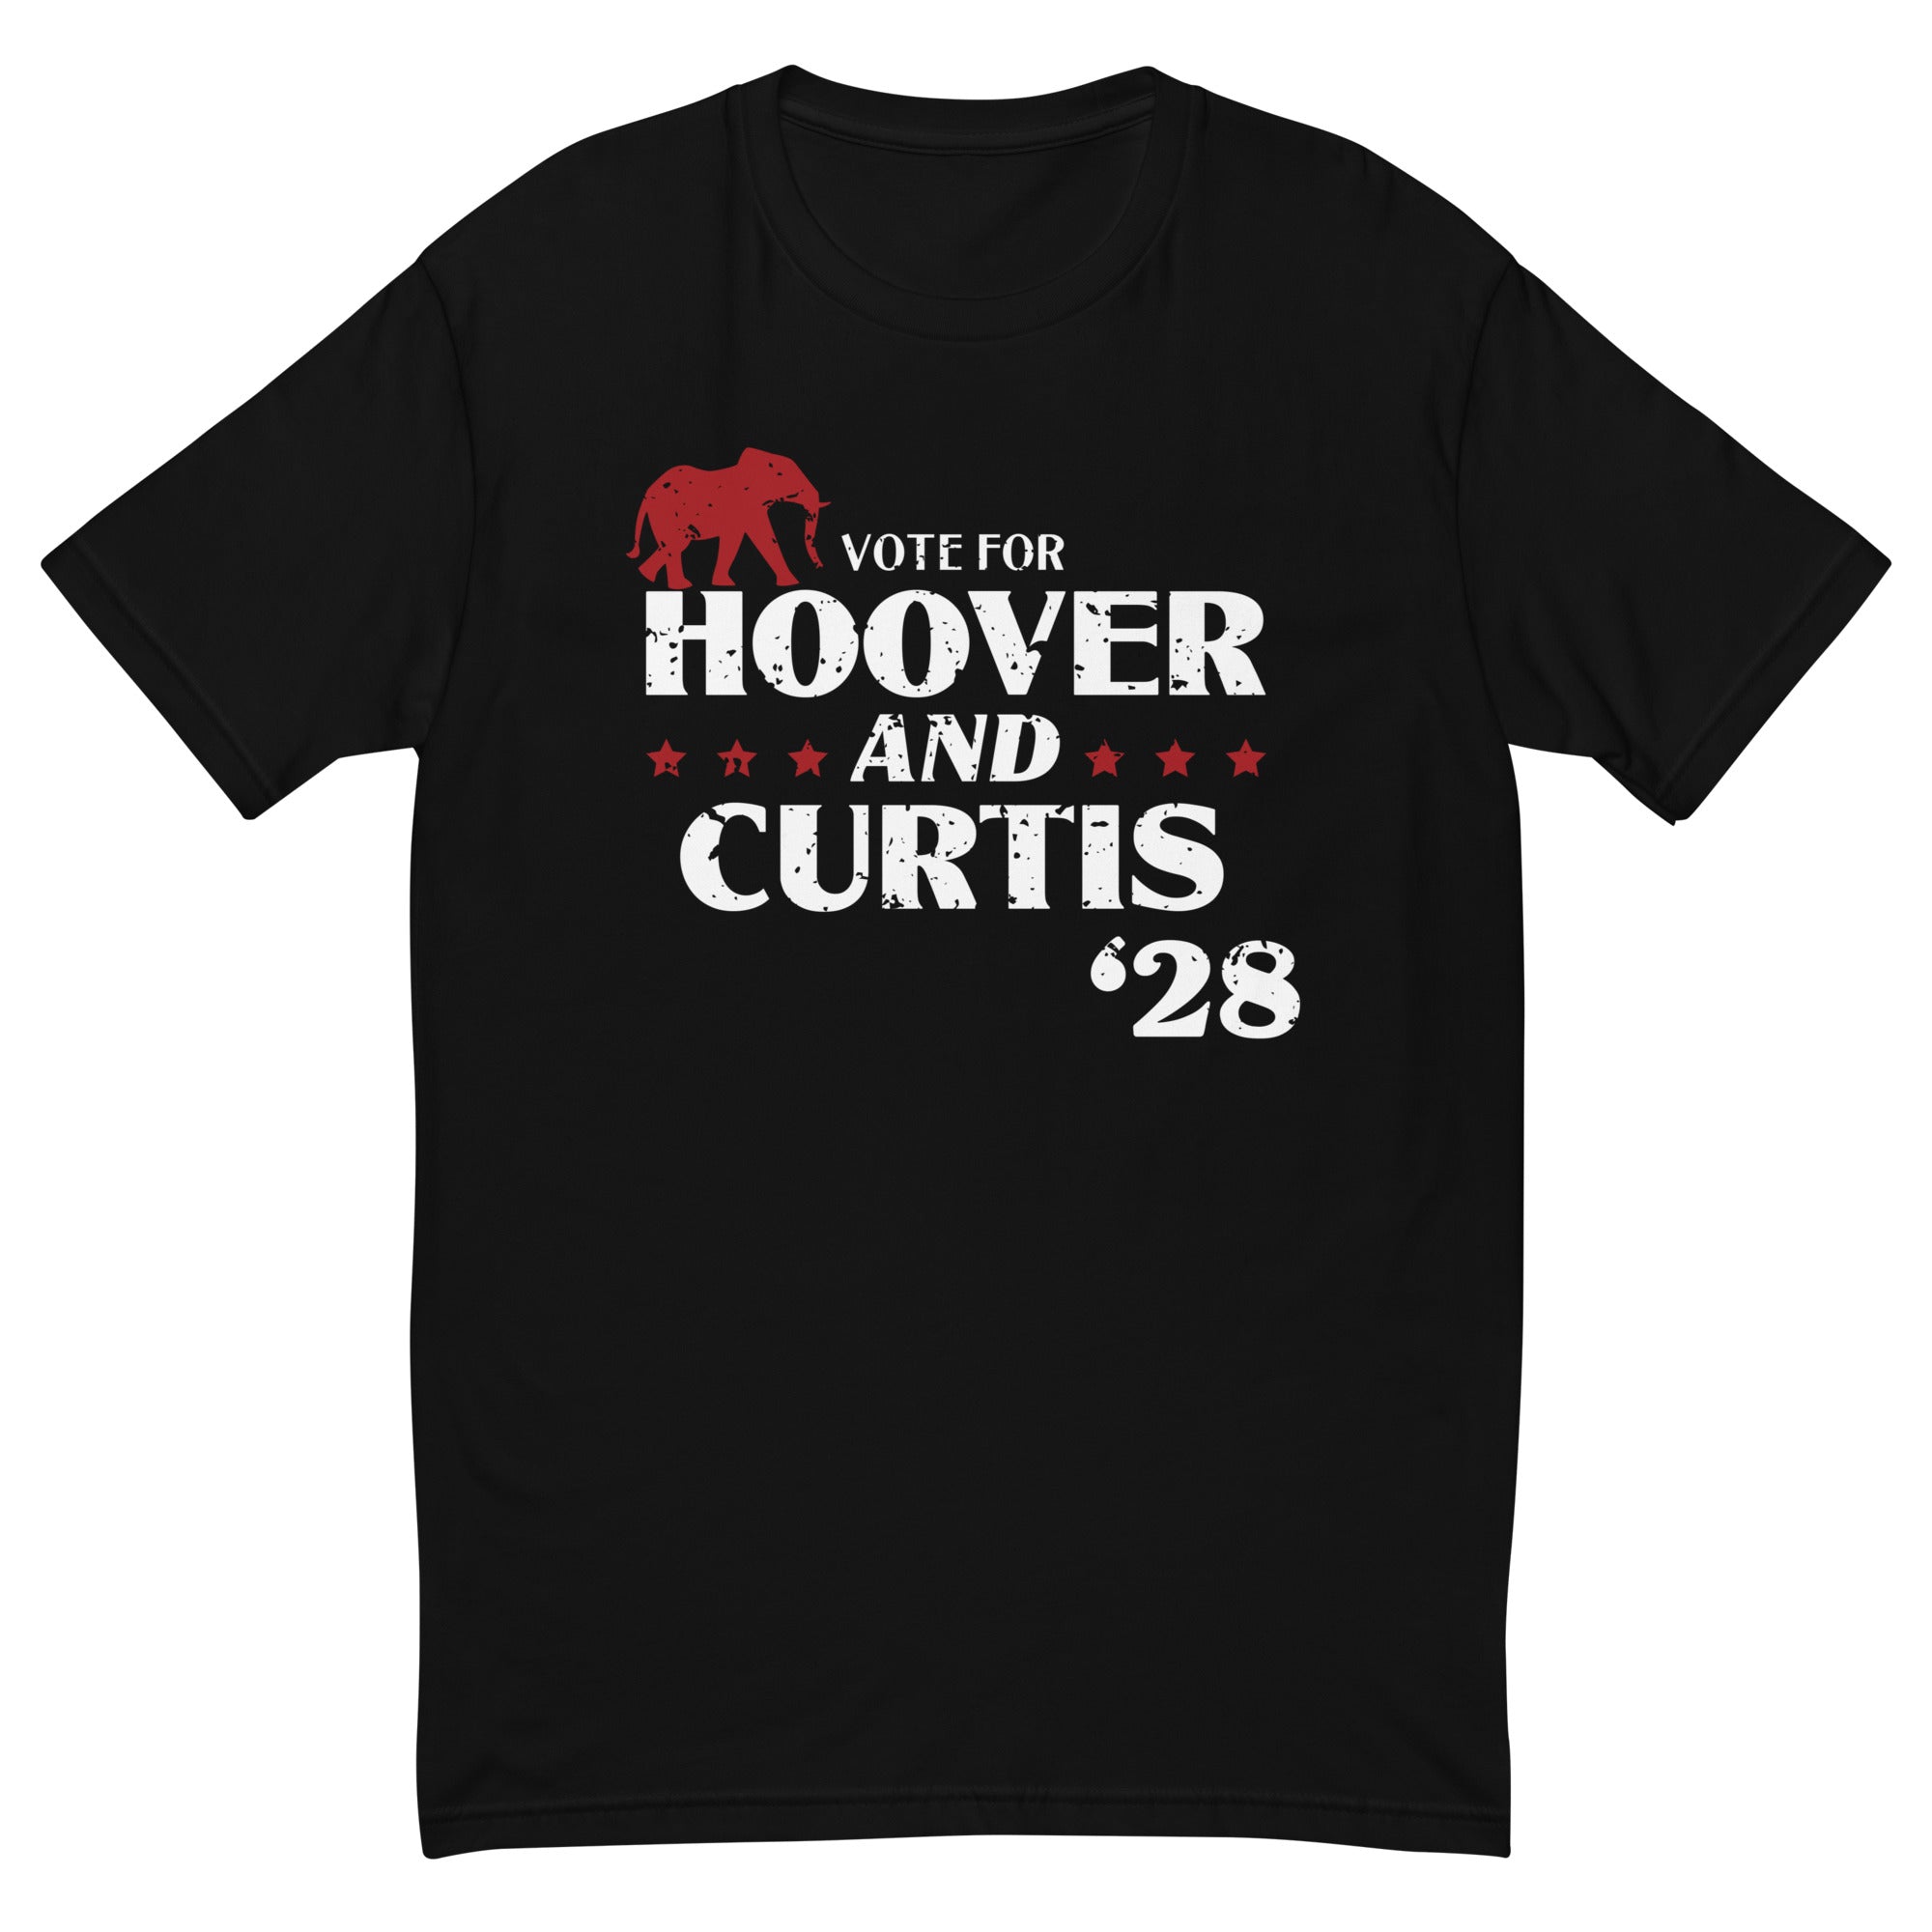 Hoover/Curtis